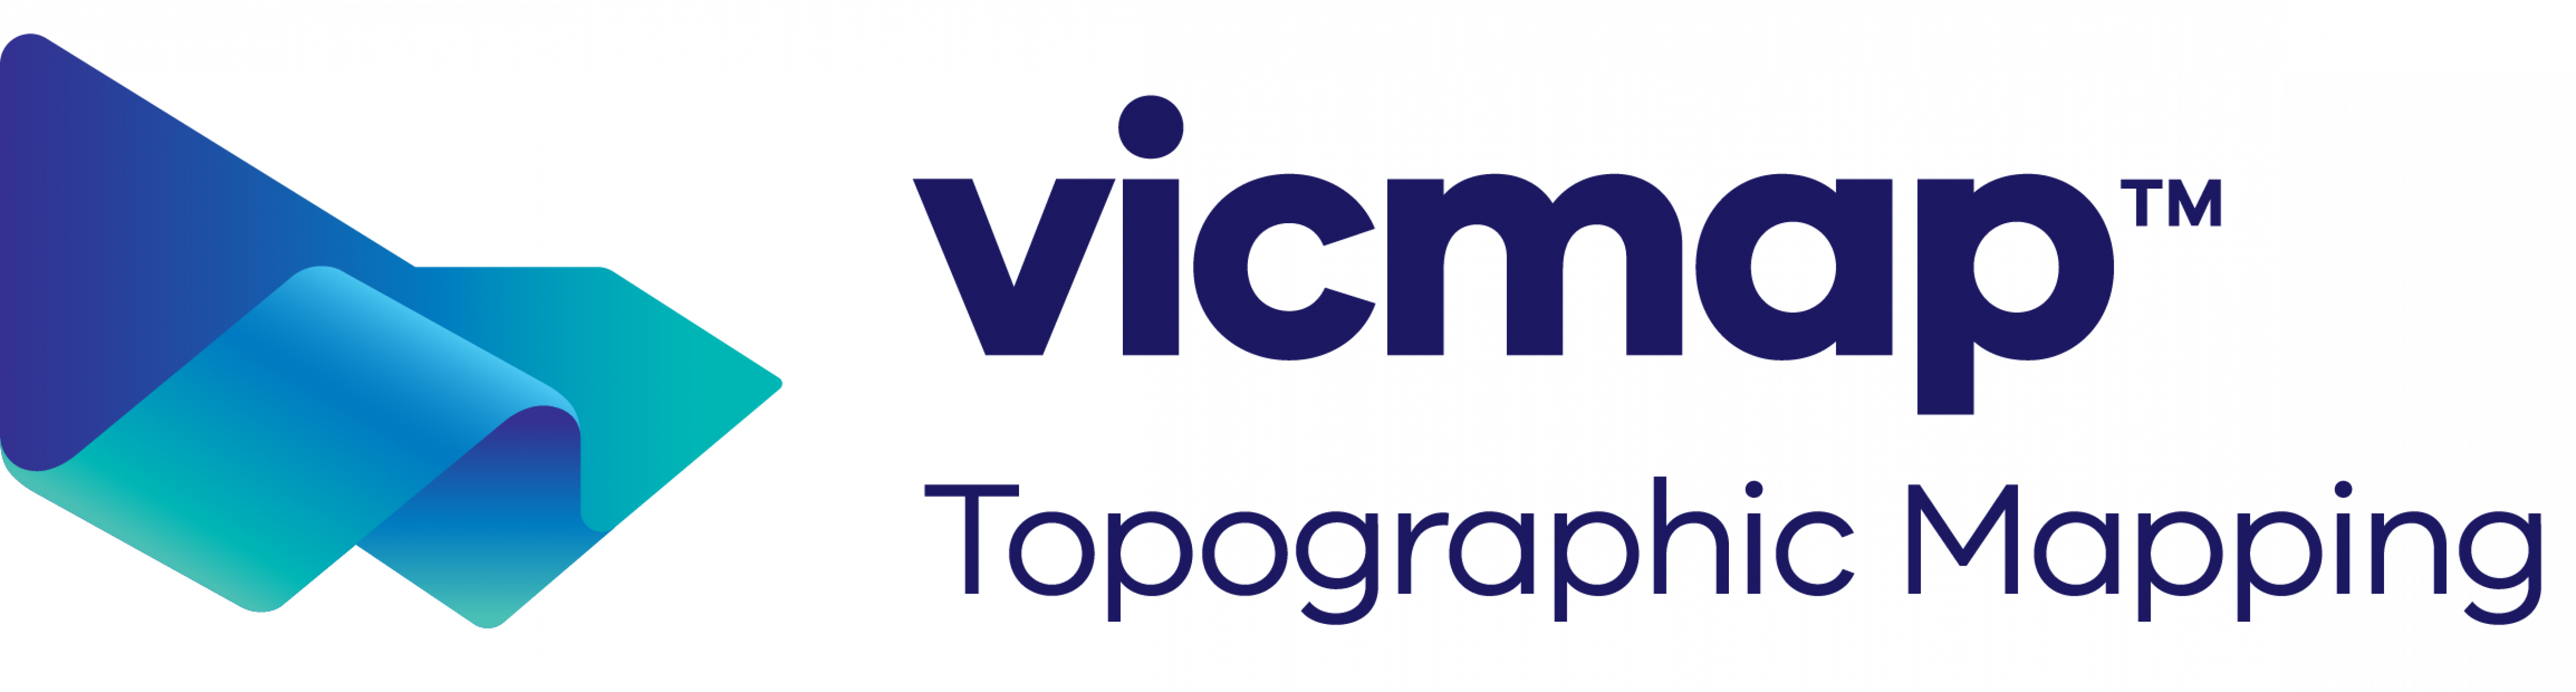 Vicmap Topographic Mapping logo